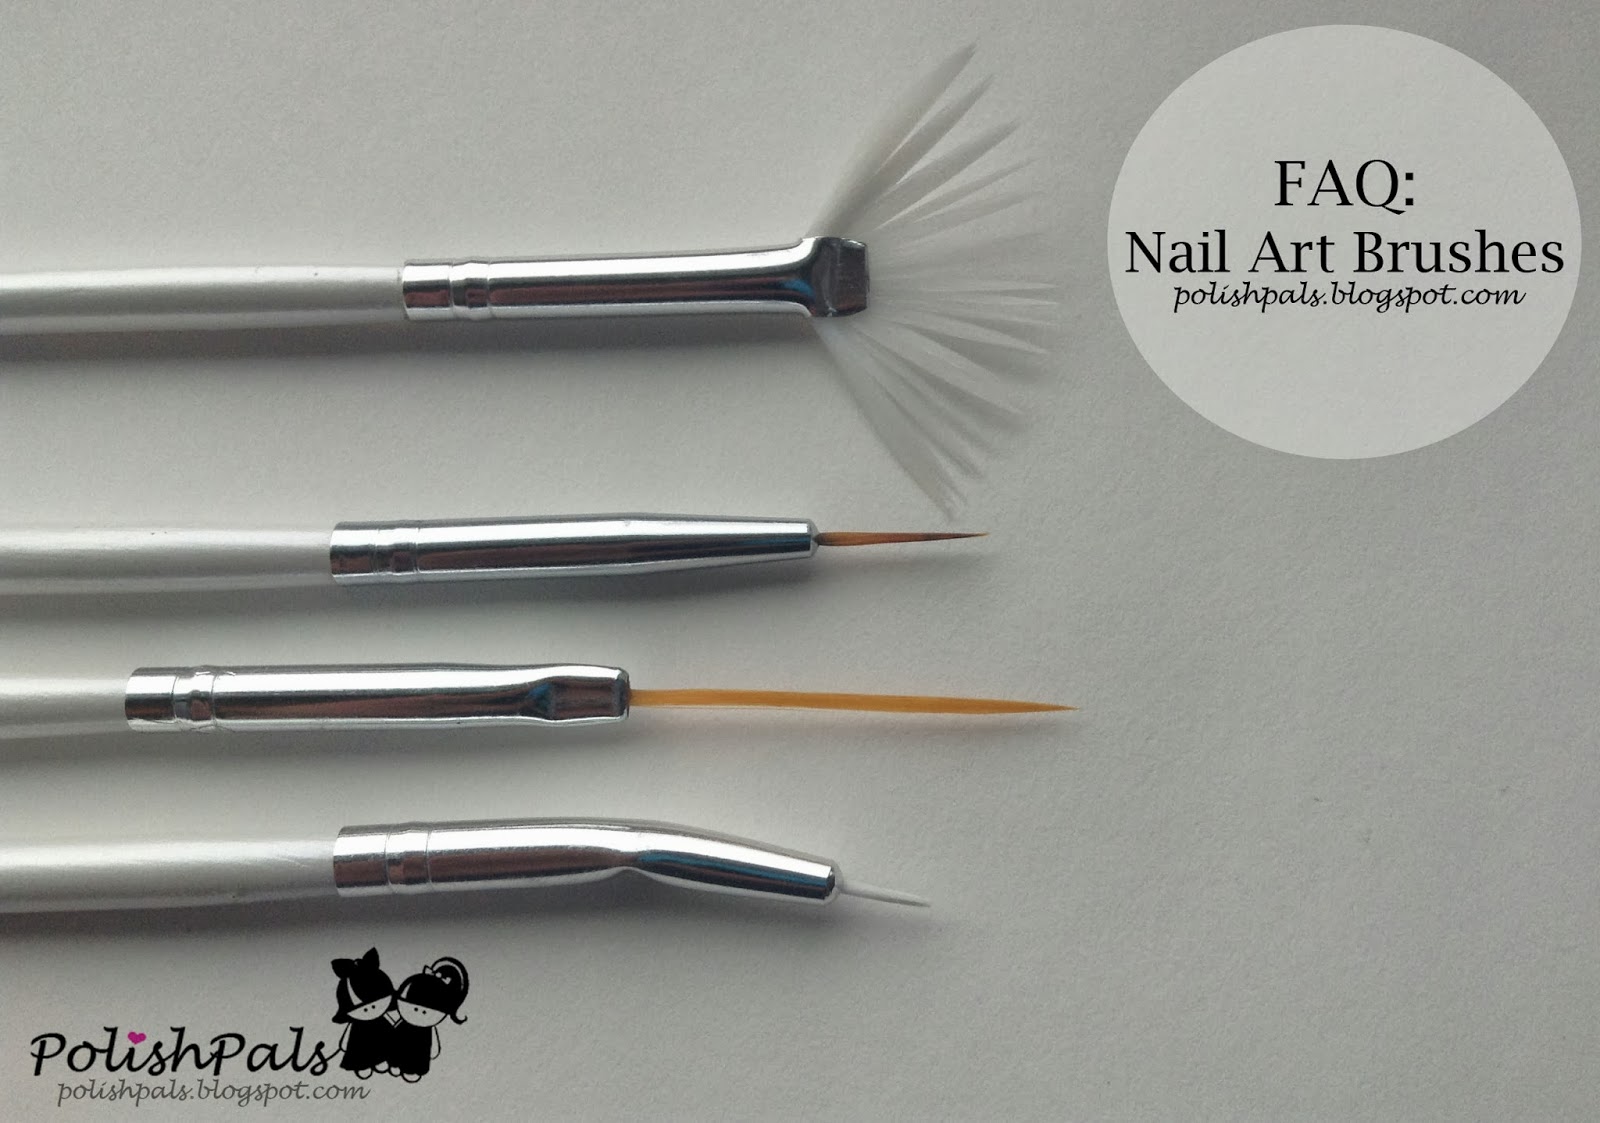 12 Small Detail Paint Brushes Brush Set for Nail Art, Crafts